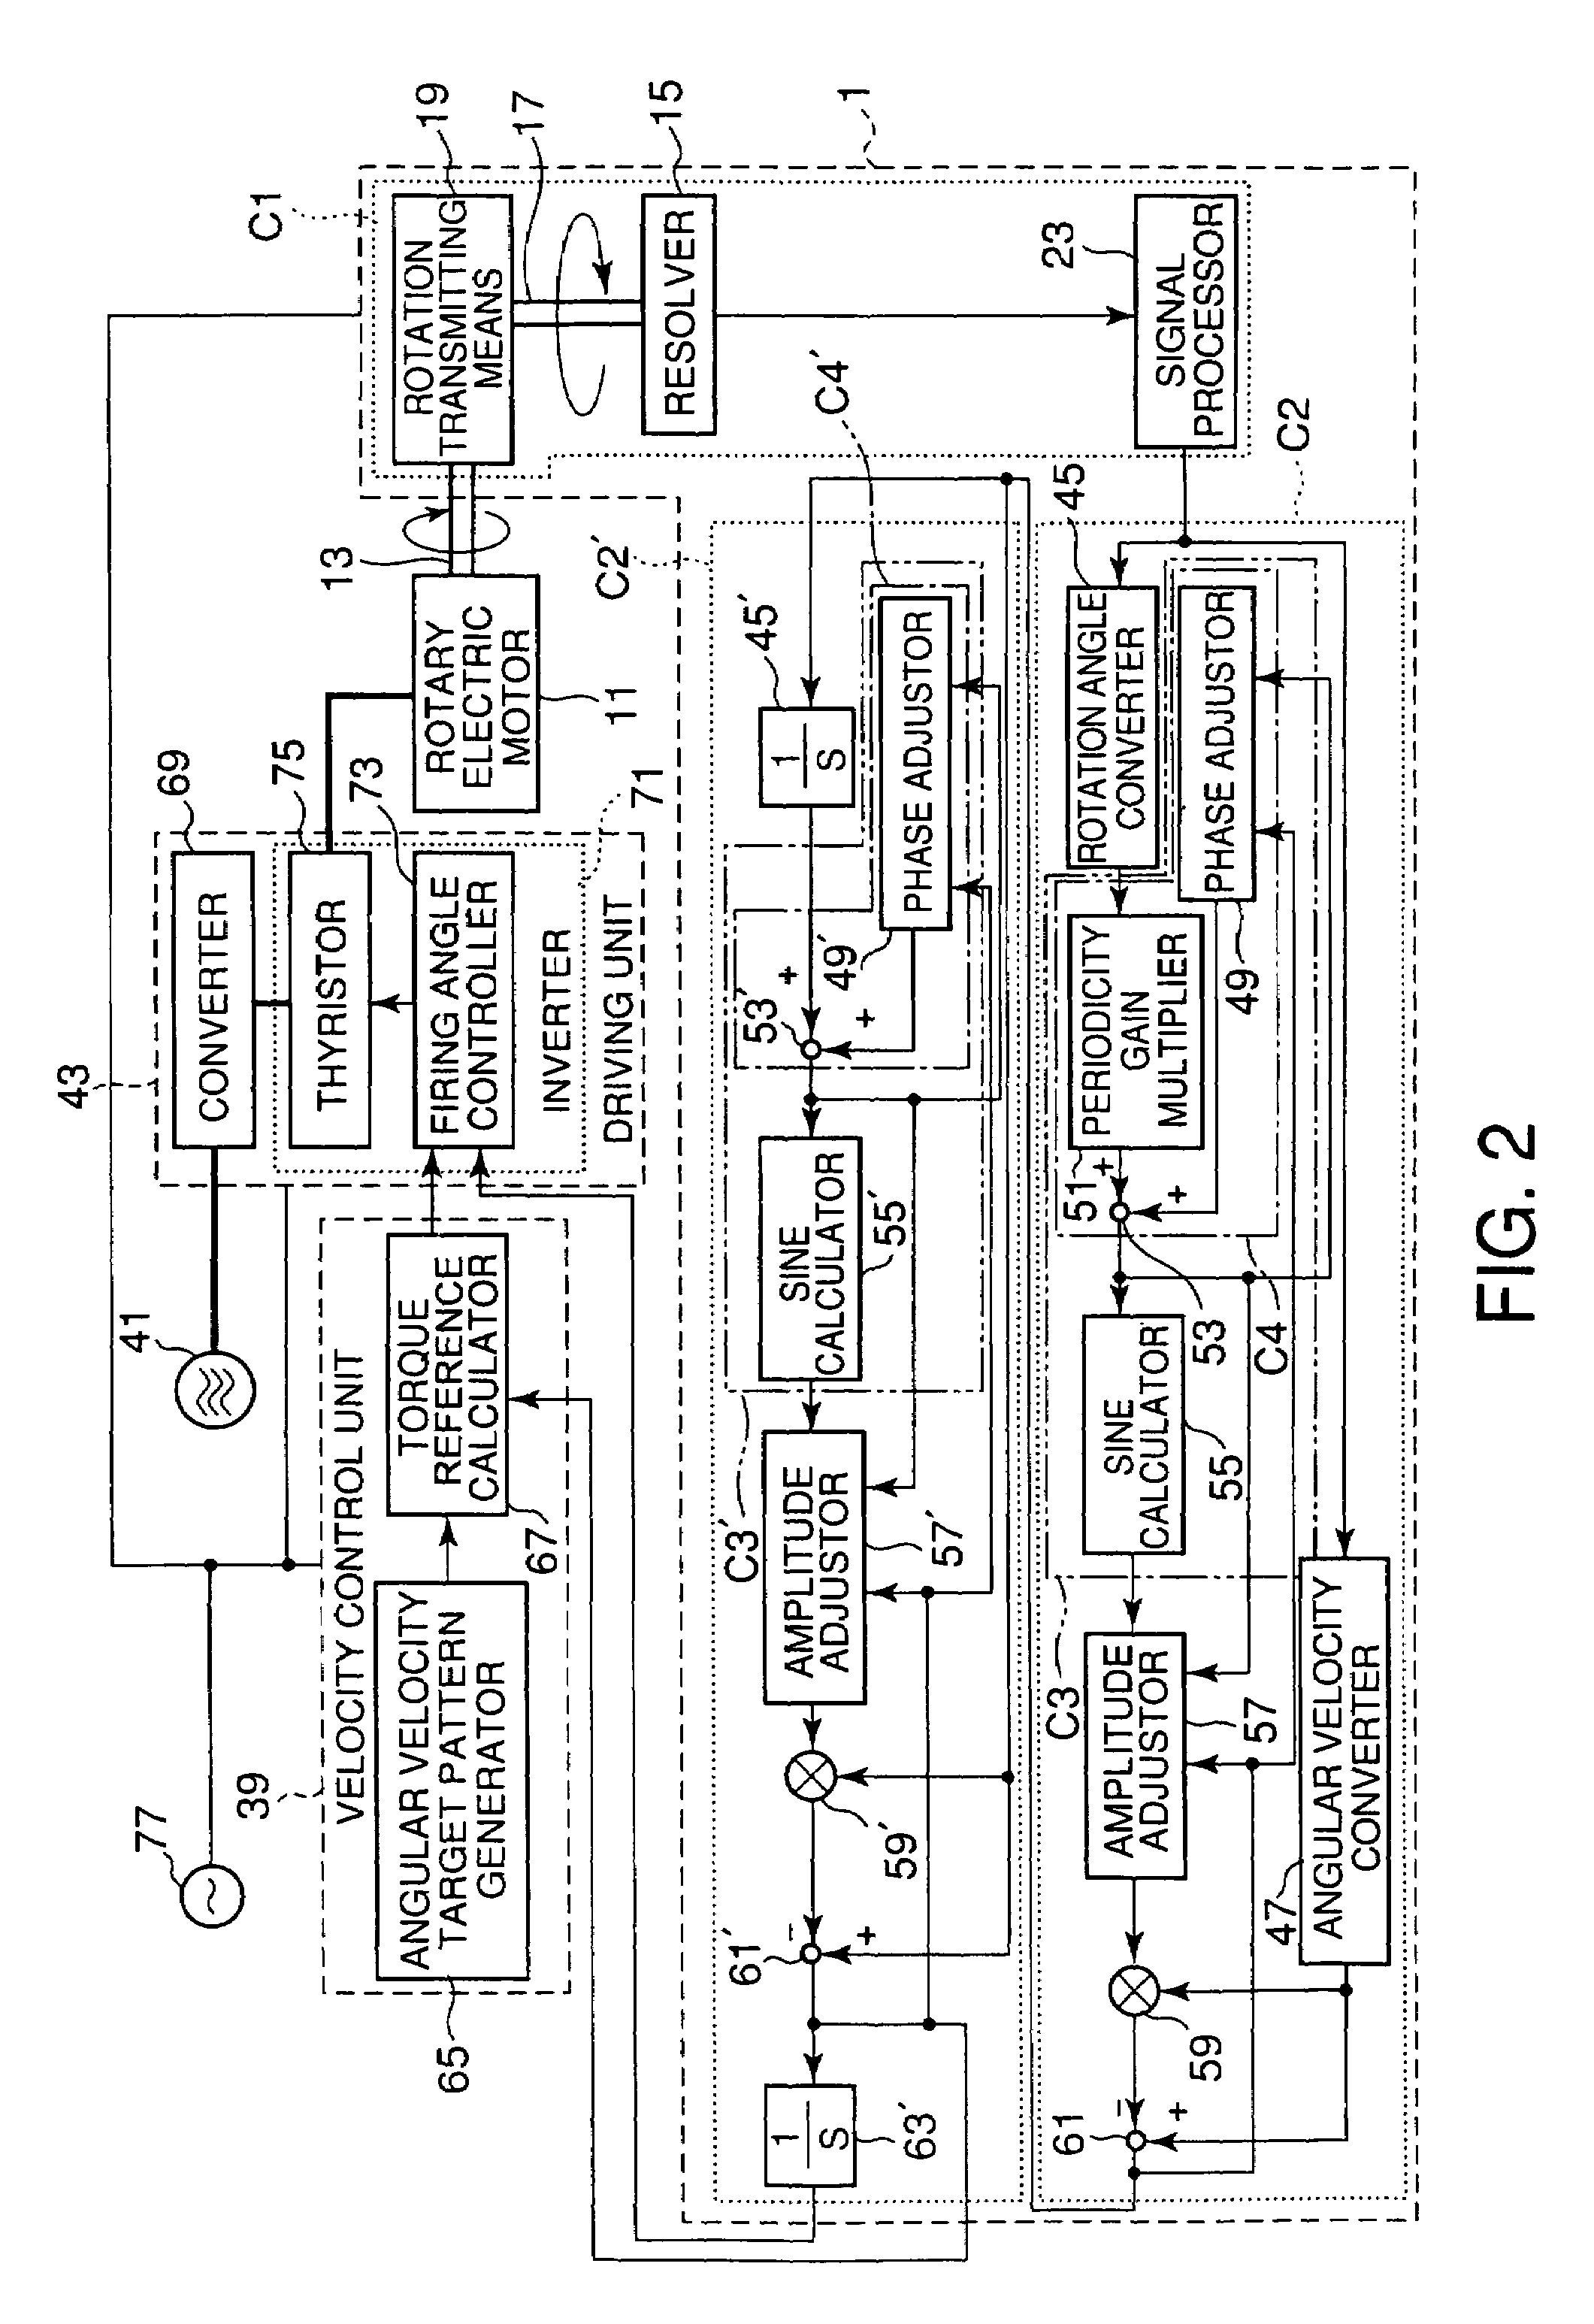 Rotation detection device